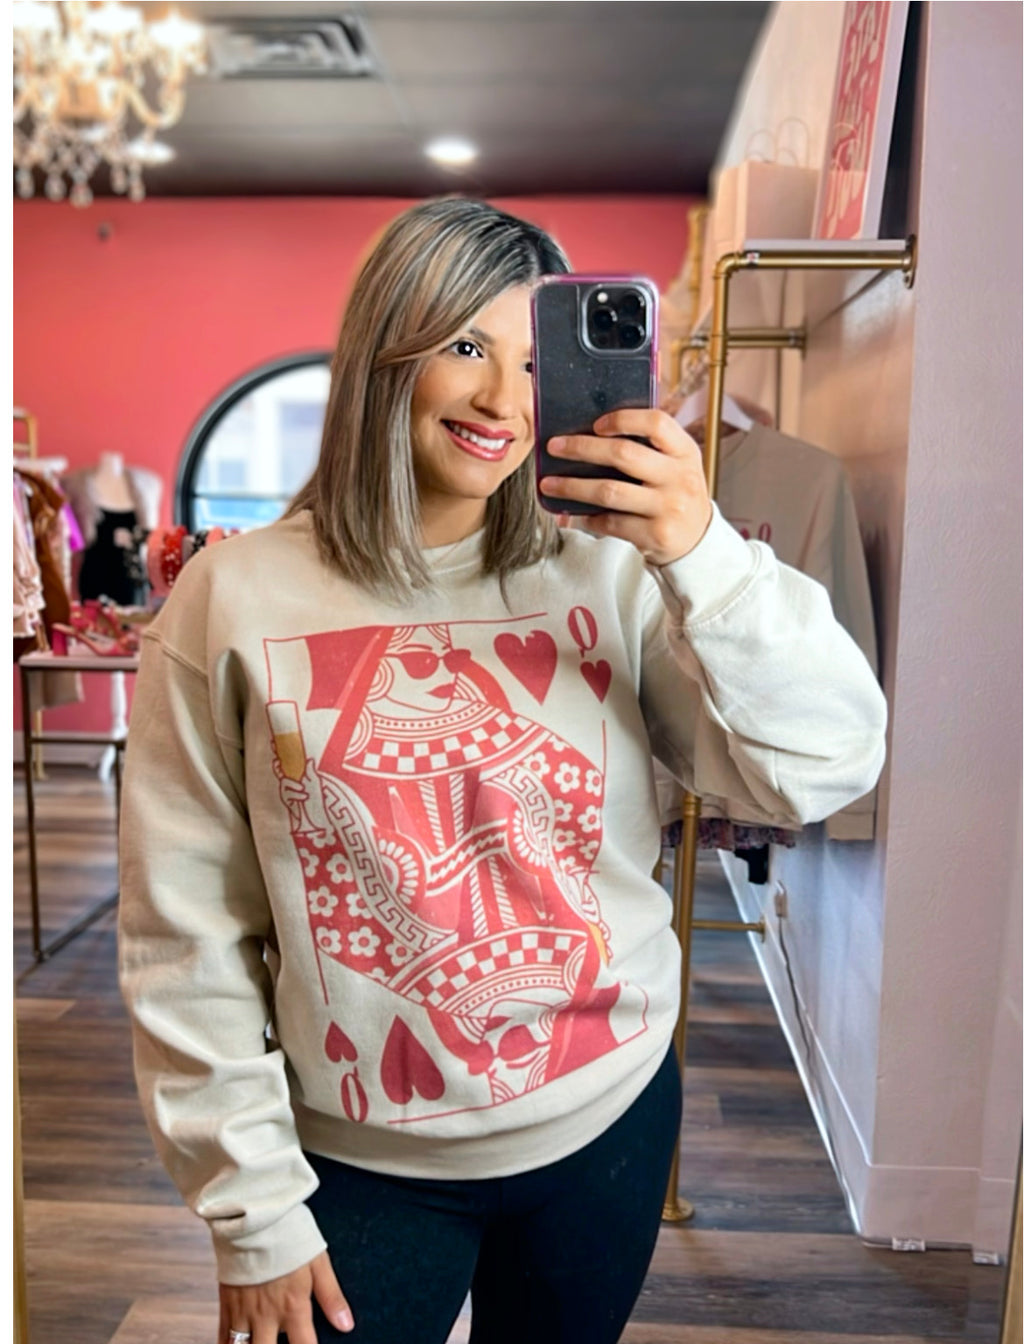 “CHAMPAGNE QUEEN” Sweater